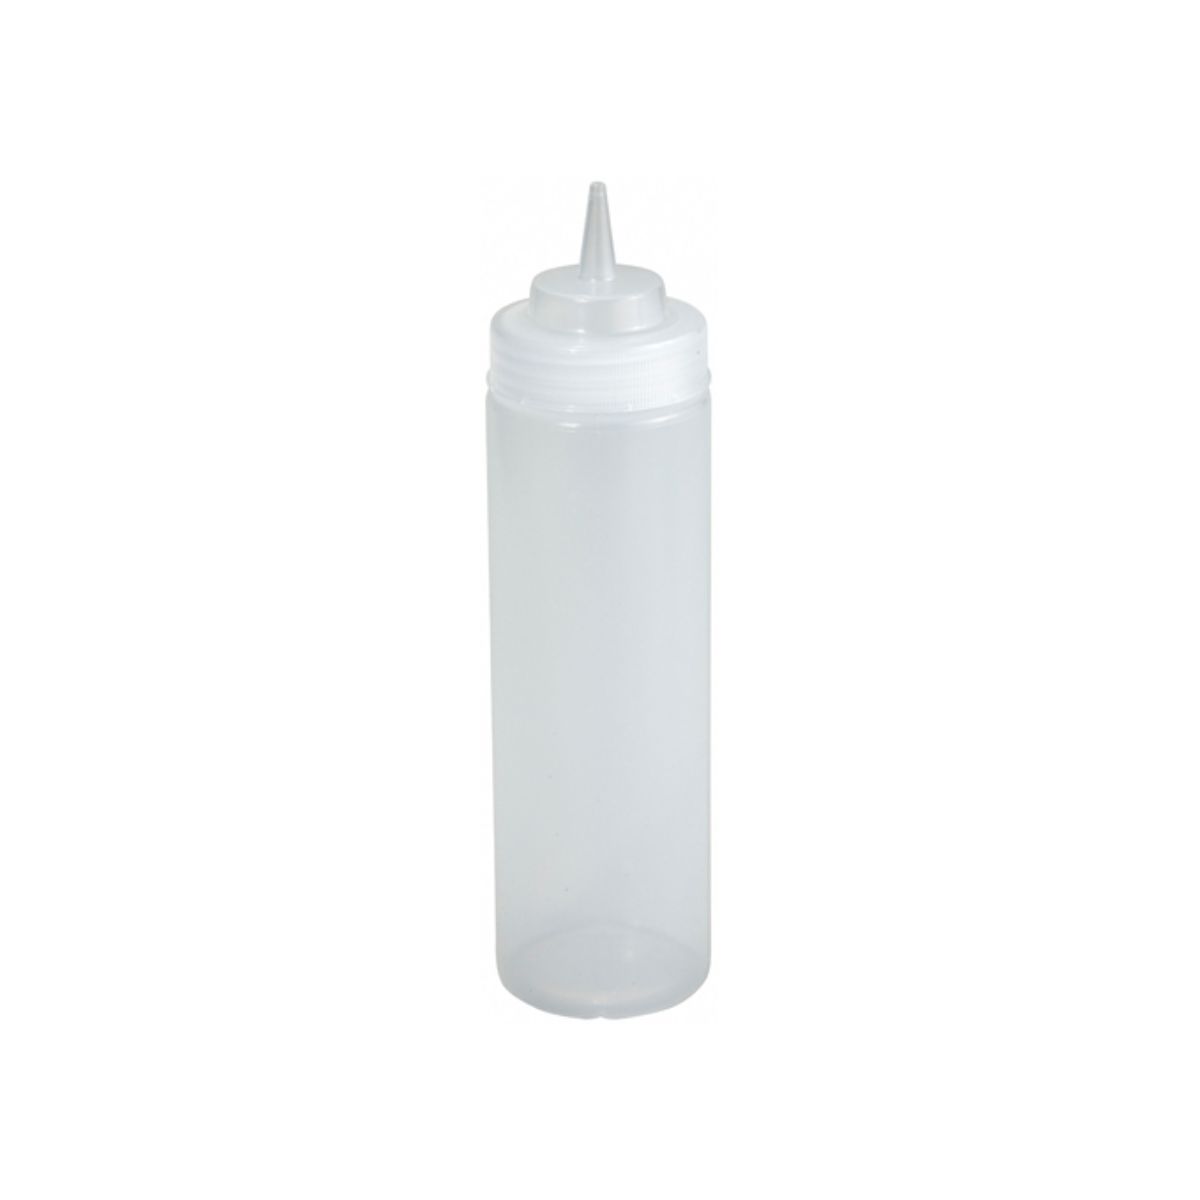 Winco 16oz Wide-Mouth Squeeze Bottle, Clear